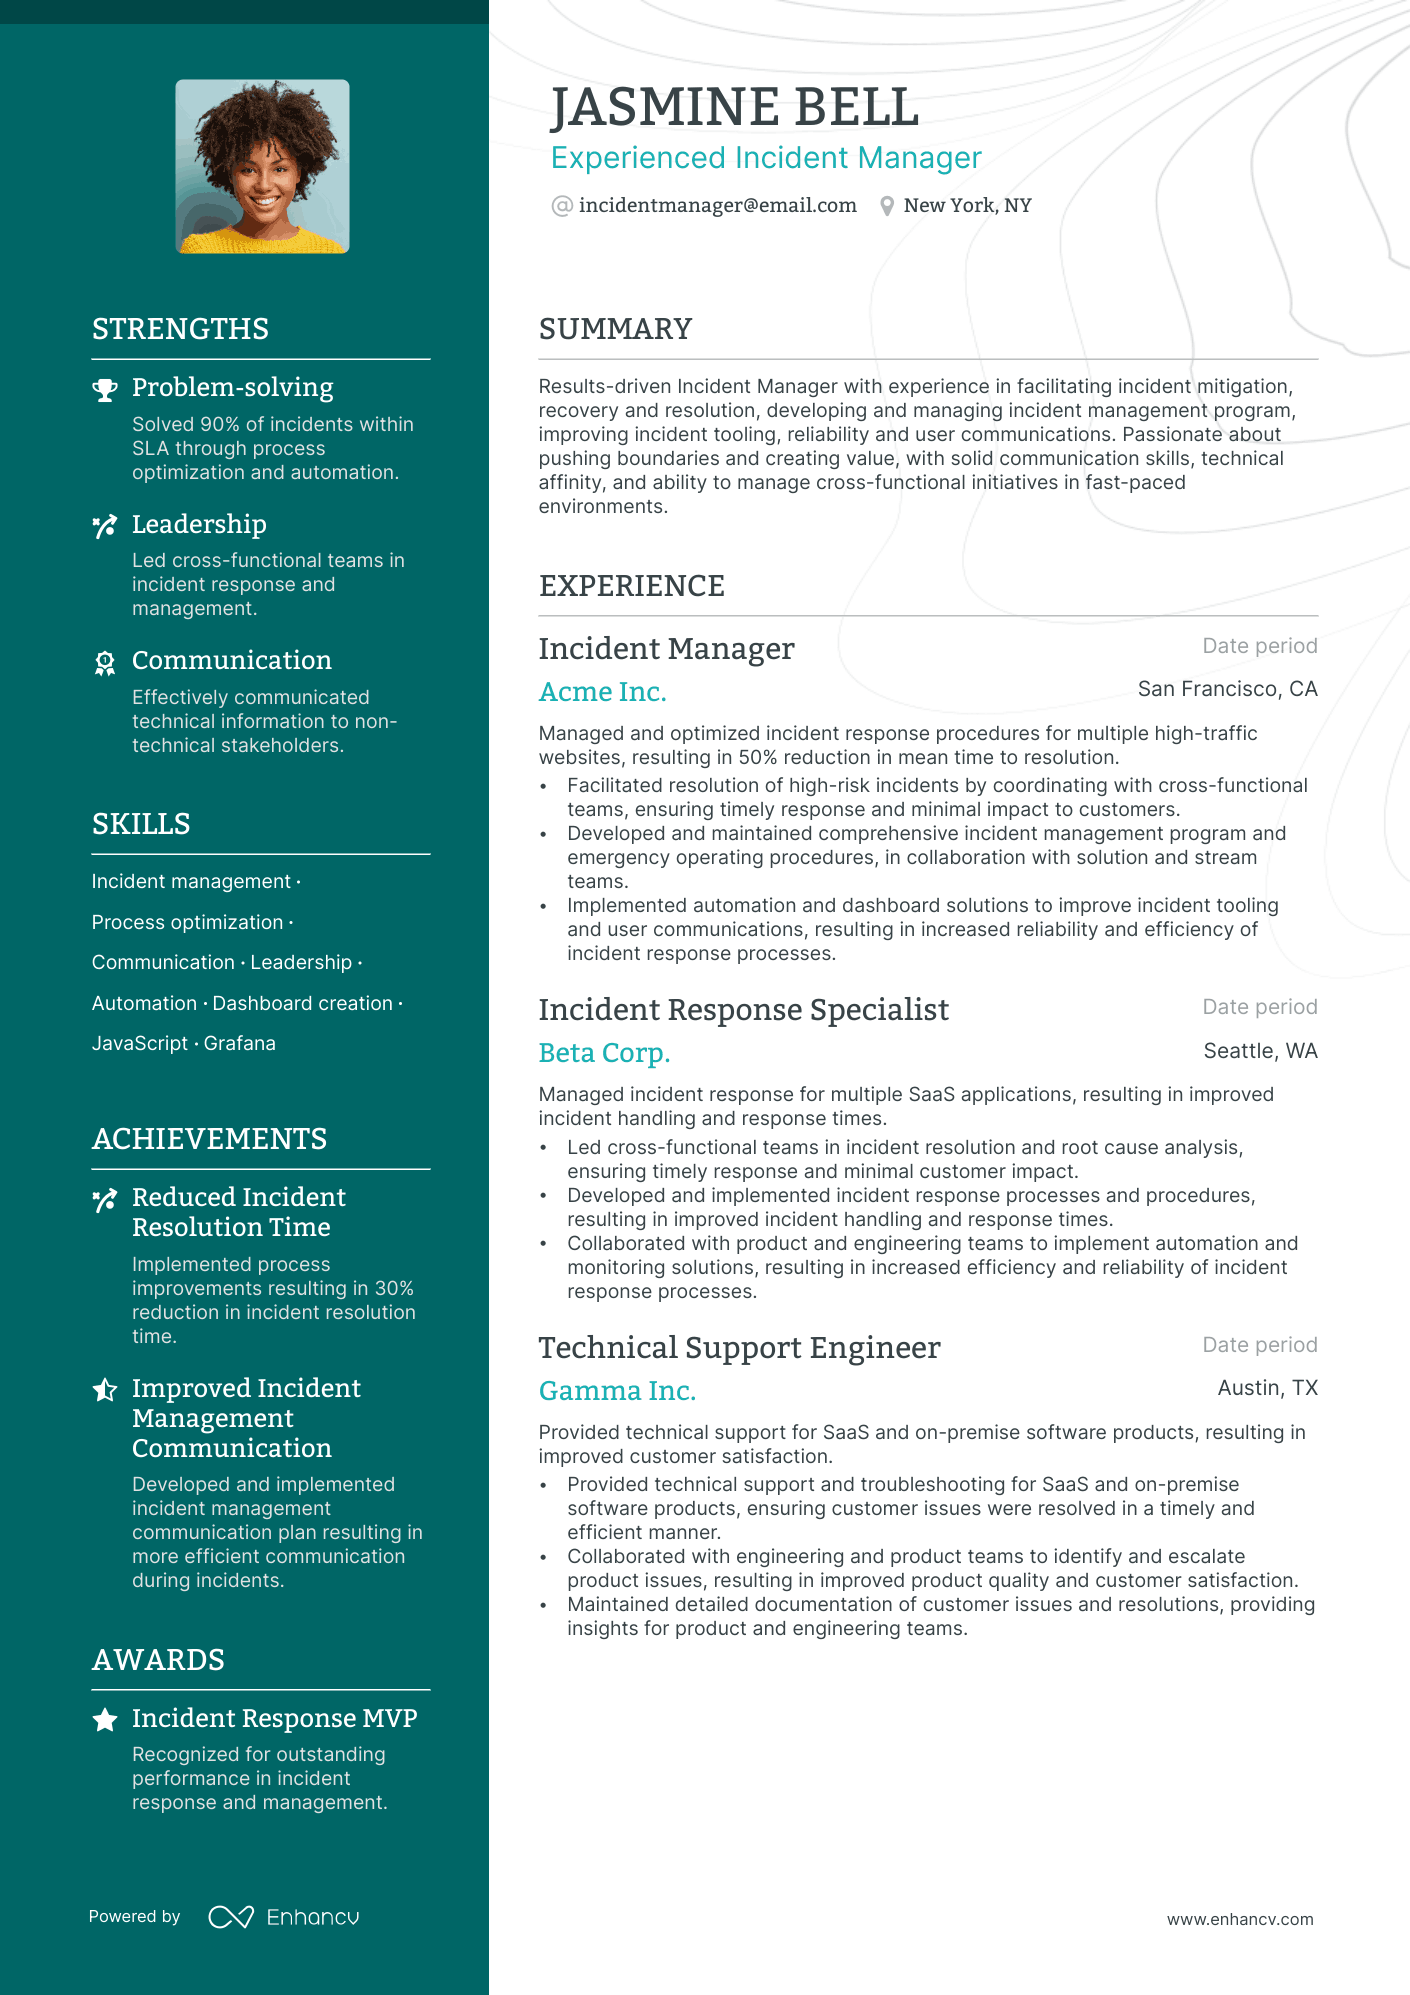 Incident Manager resume example